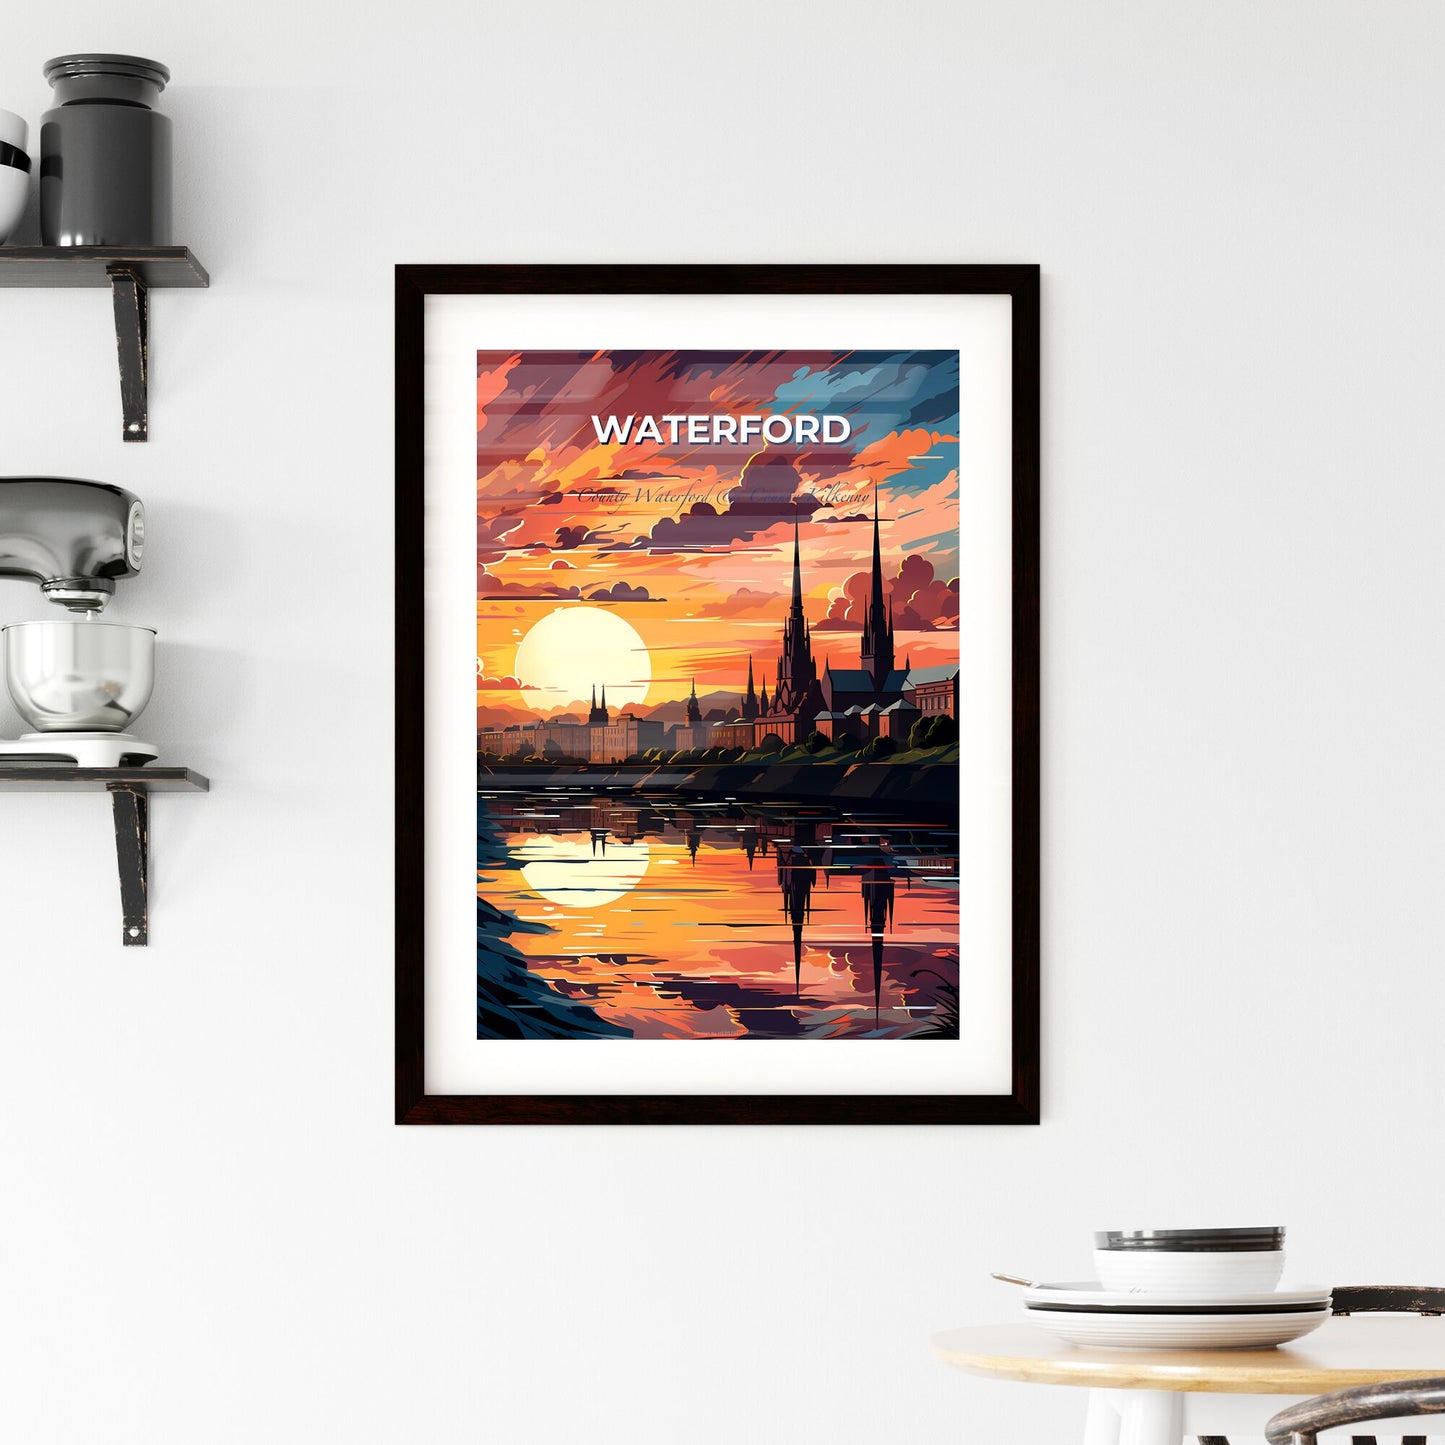 Waterford, County Waterford & County Kilkenny, A Poster of a sunset over a city Default Title